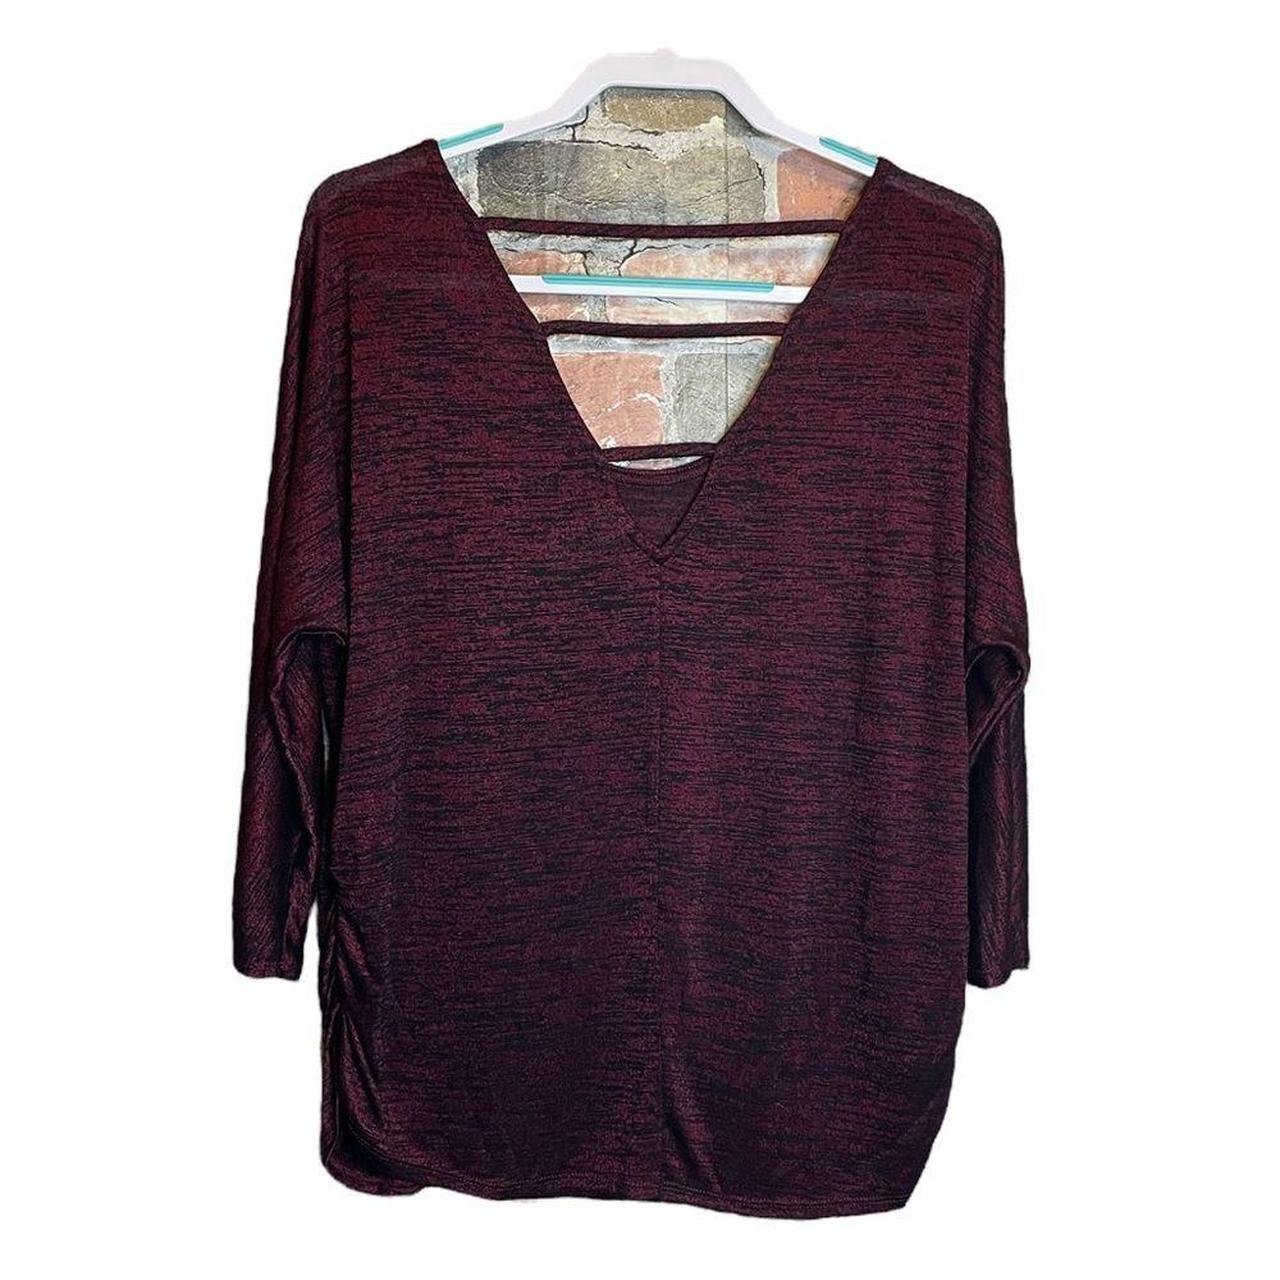 Faded Glory Maroon Blouse 1X (16W) Inventory #: M-76 - Depop